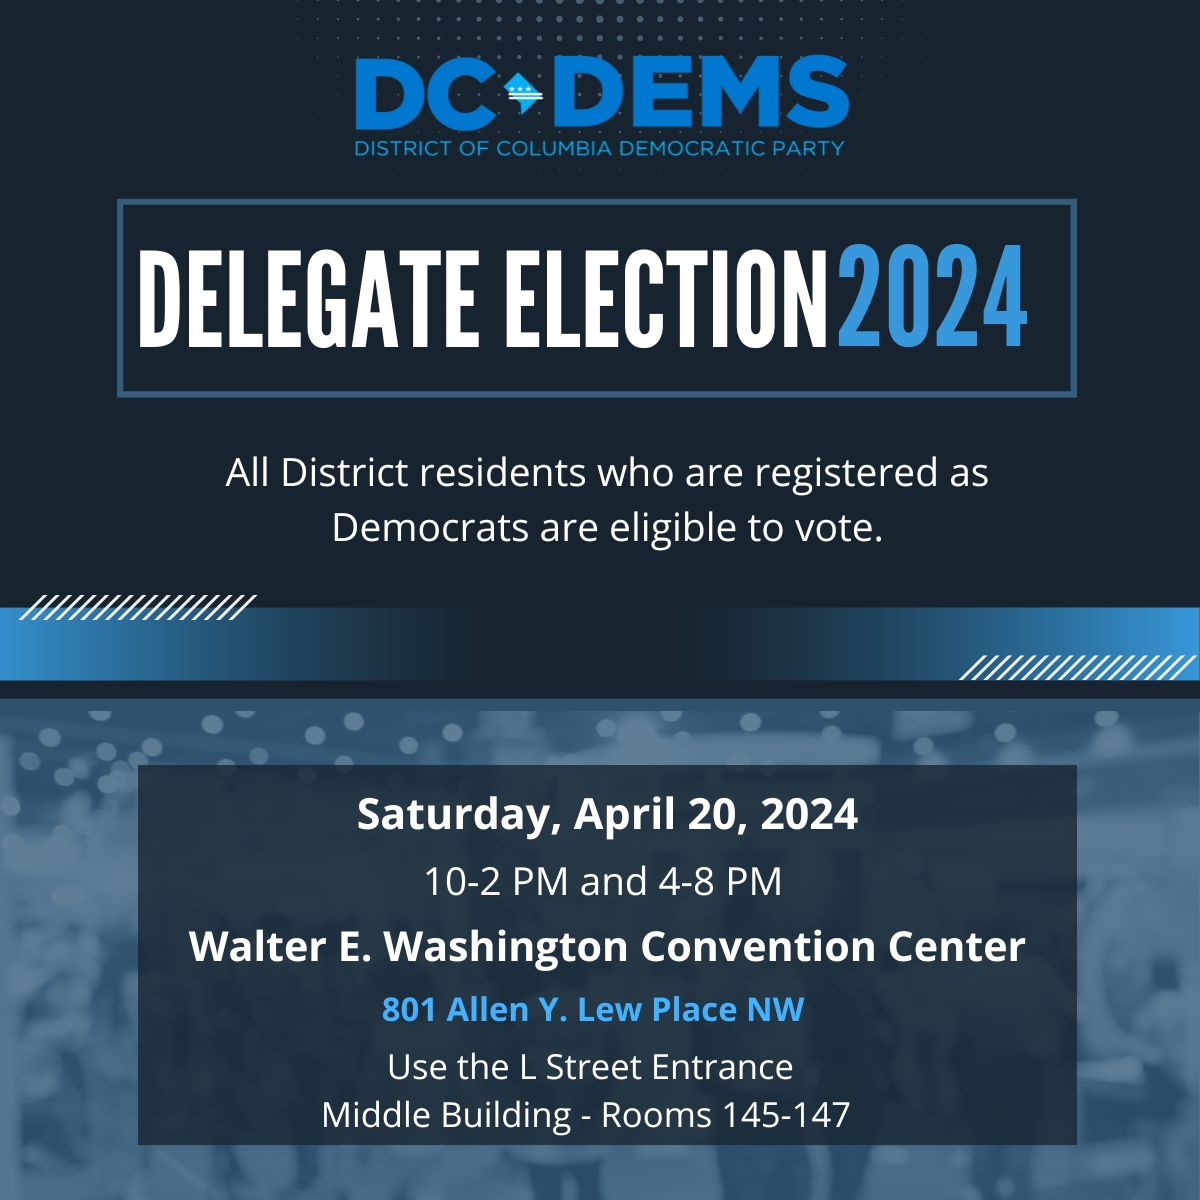 Come out and vote for your 2024 District-Level Delegates on April 20th at the Walter E. Washington Convention Center! All District Residents who are registered as Democrats are eligible to vote. RSVP: mobilize.us/dcdems/event/6…